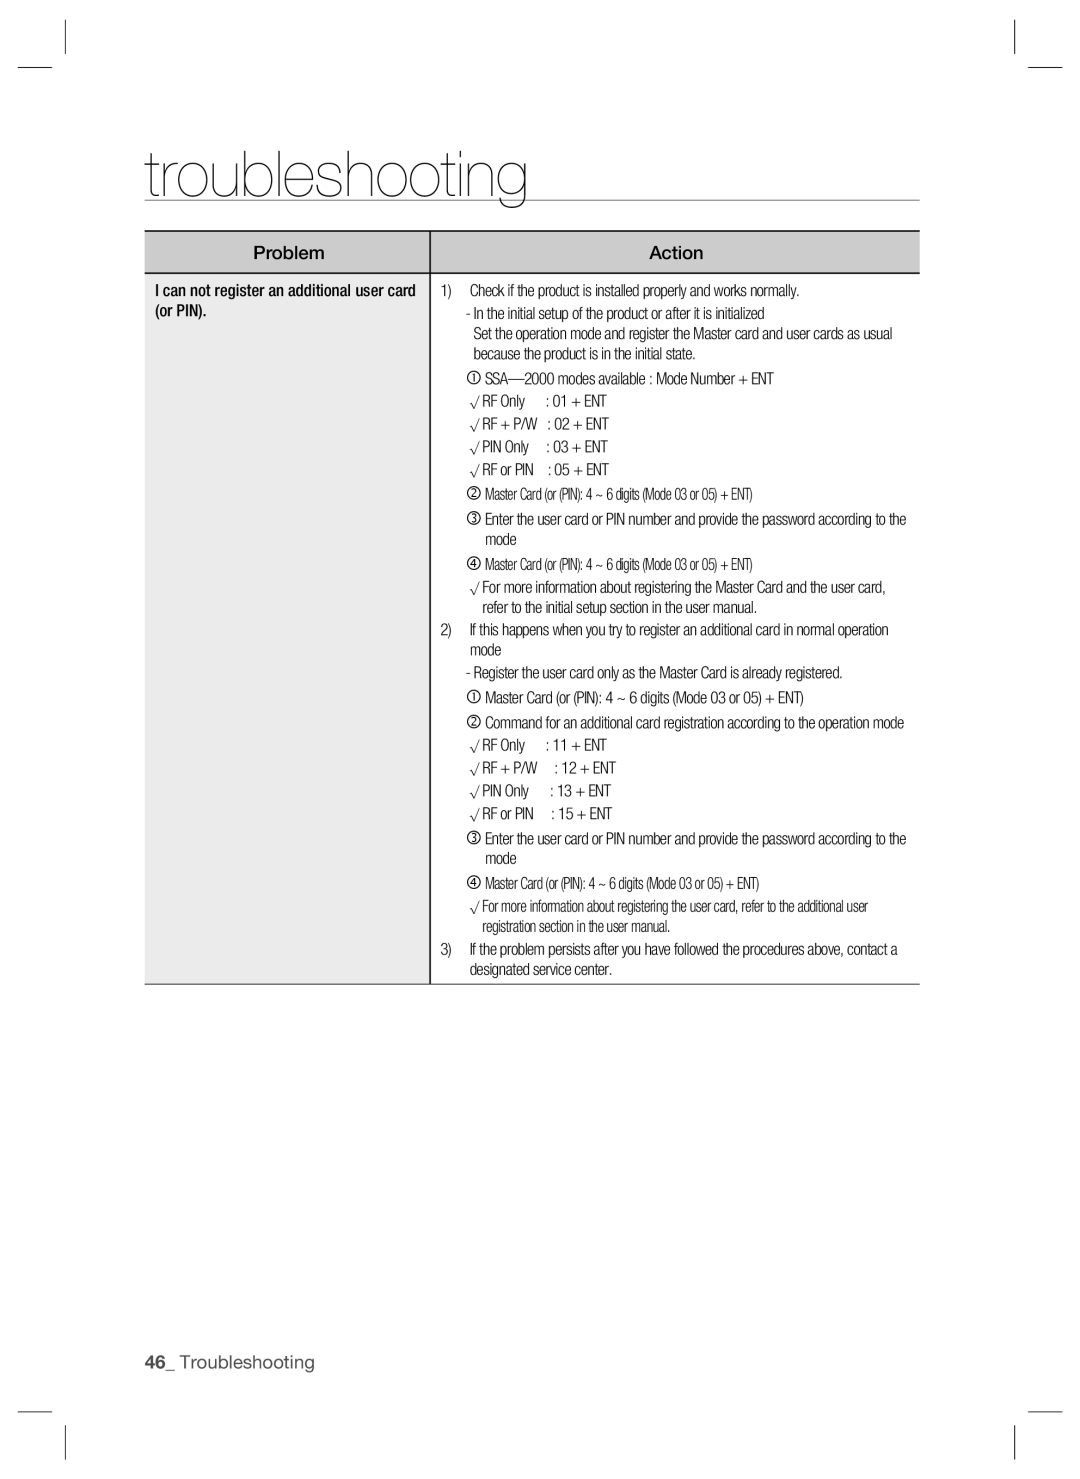 Samsung SSA-S2000W user manual 46_ Troubleshooting, troubleshooting 